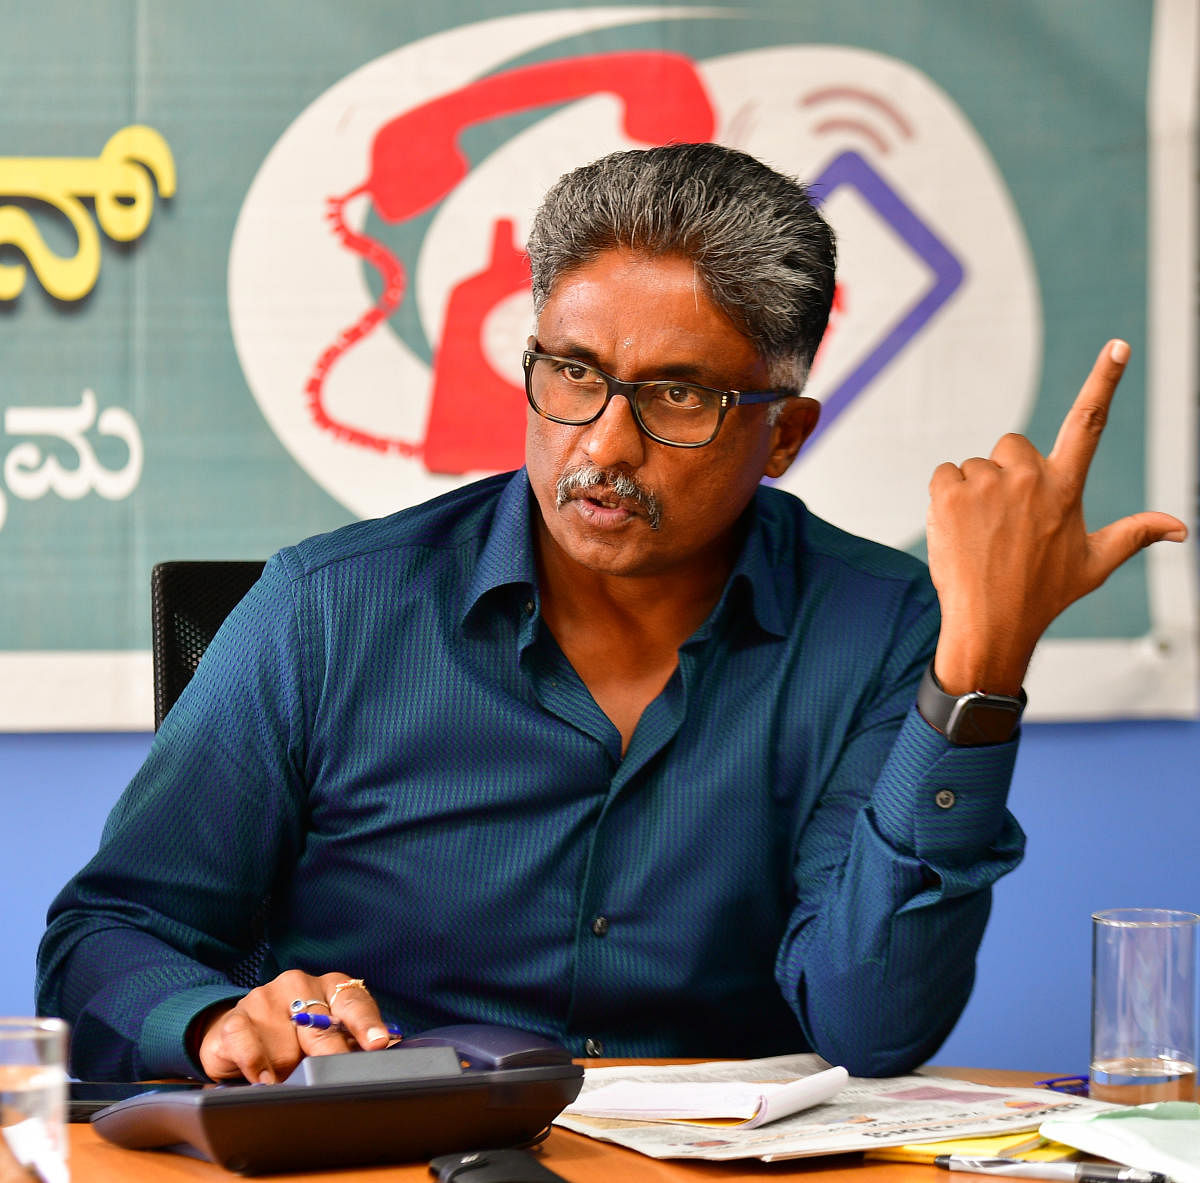 In an interaction with DH and Prajavani on Wednesday, Bangalore Metropolitan Transport Corporation (BMTC) Chairman N S Nandiesha Reddy said they were working on a plan to take over the entire ITS infrastructure and digital ecosystem. DH Photo